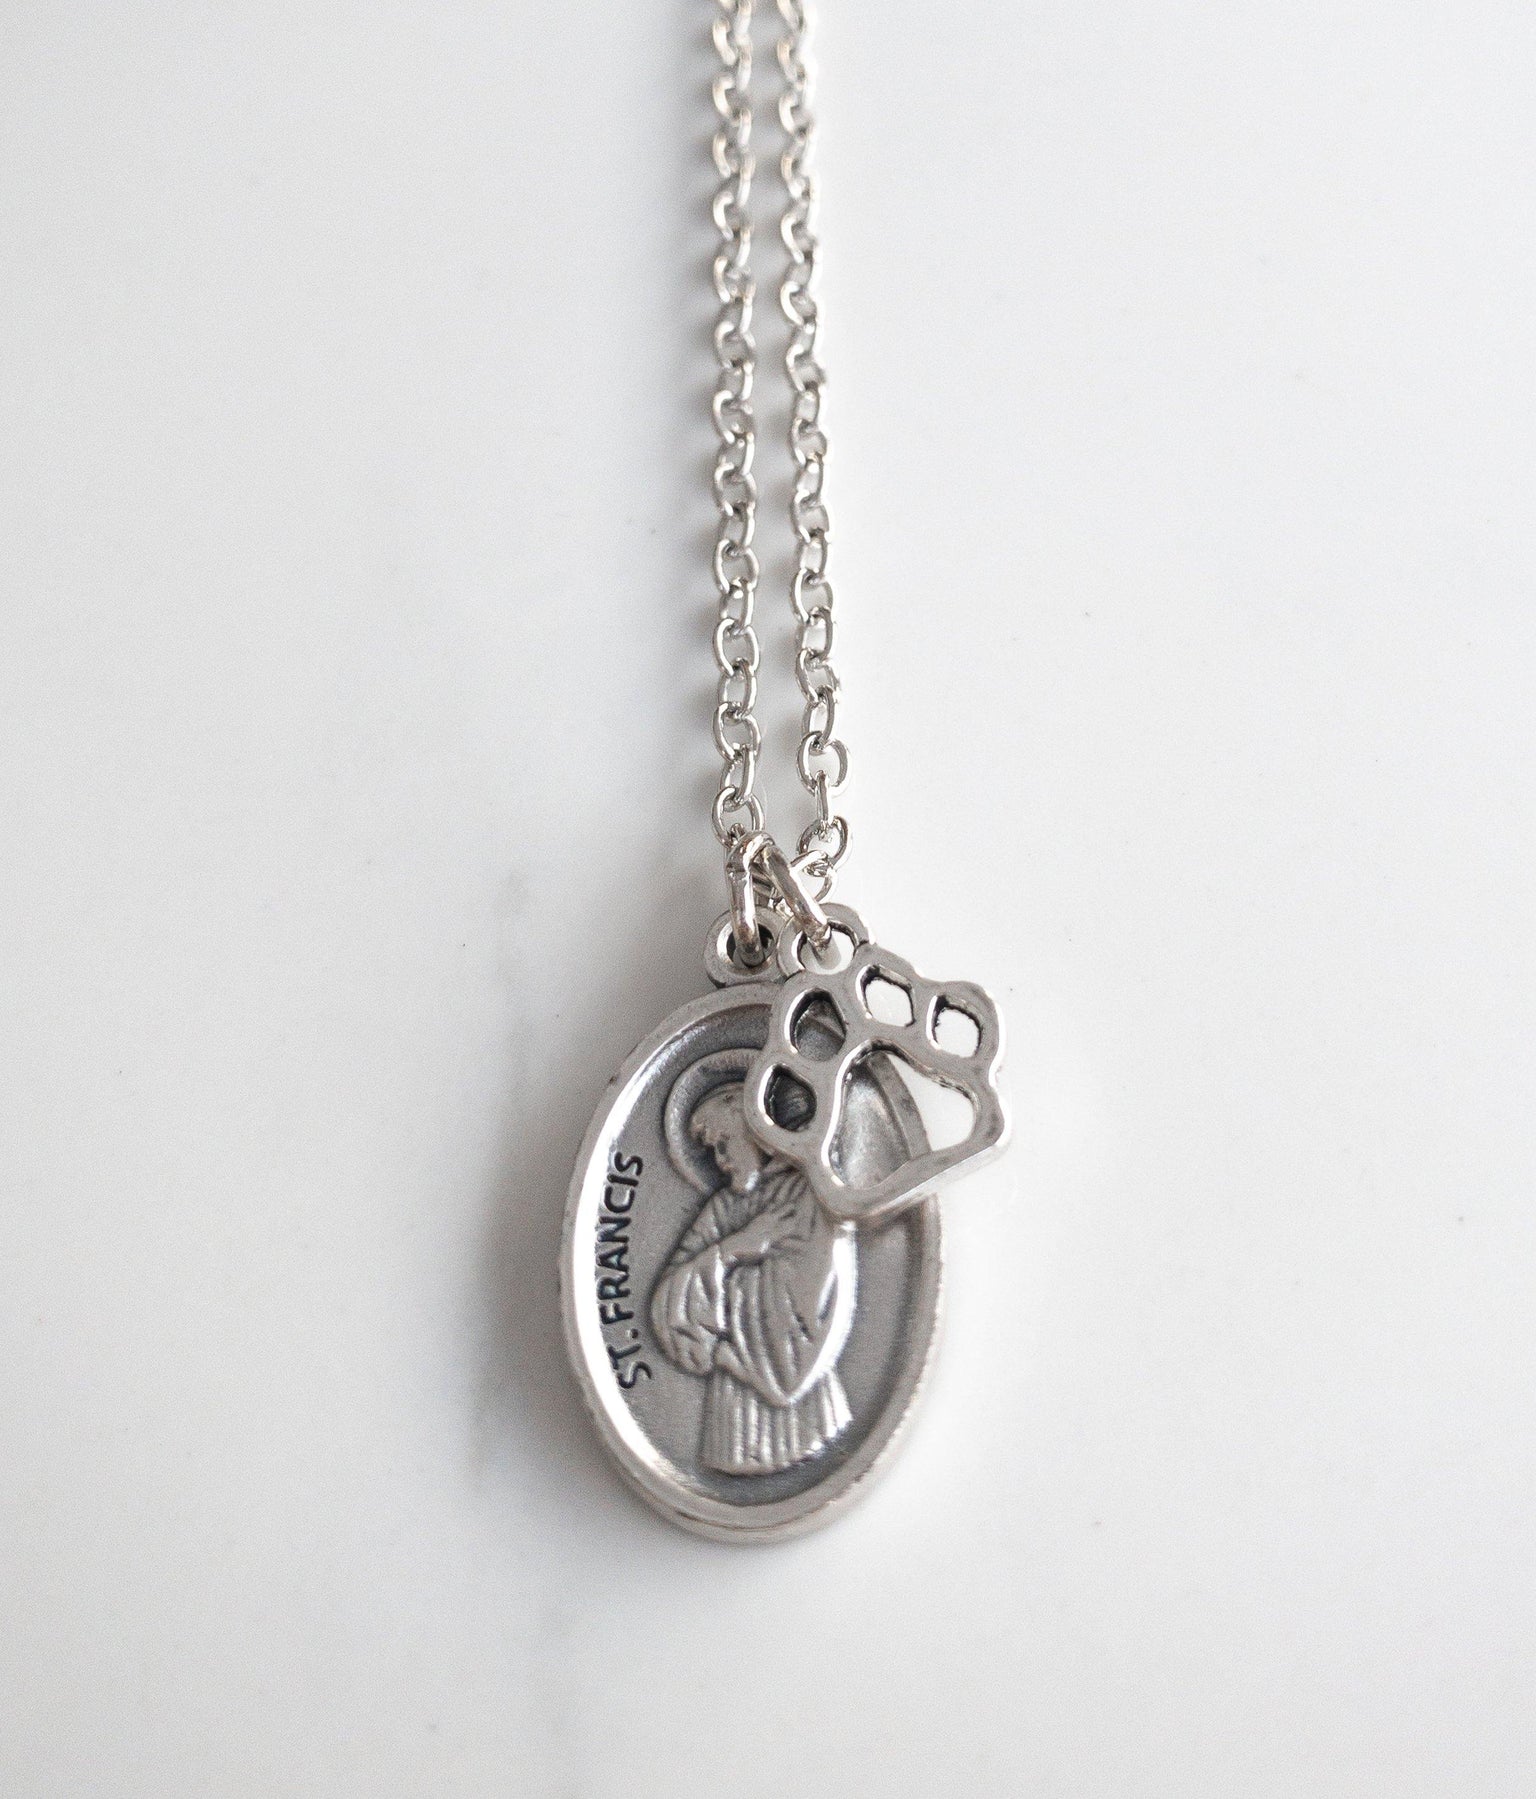 St Francis of Assisi Necklace